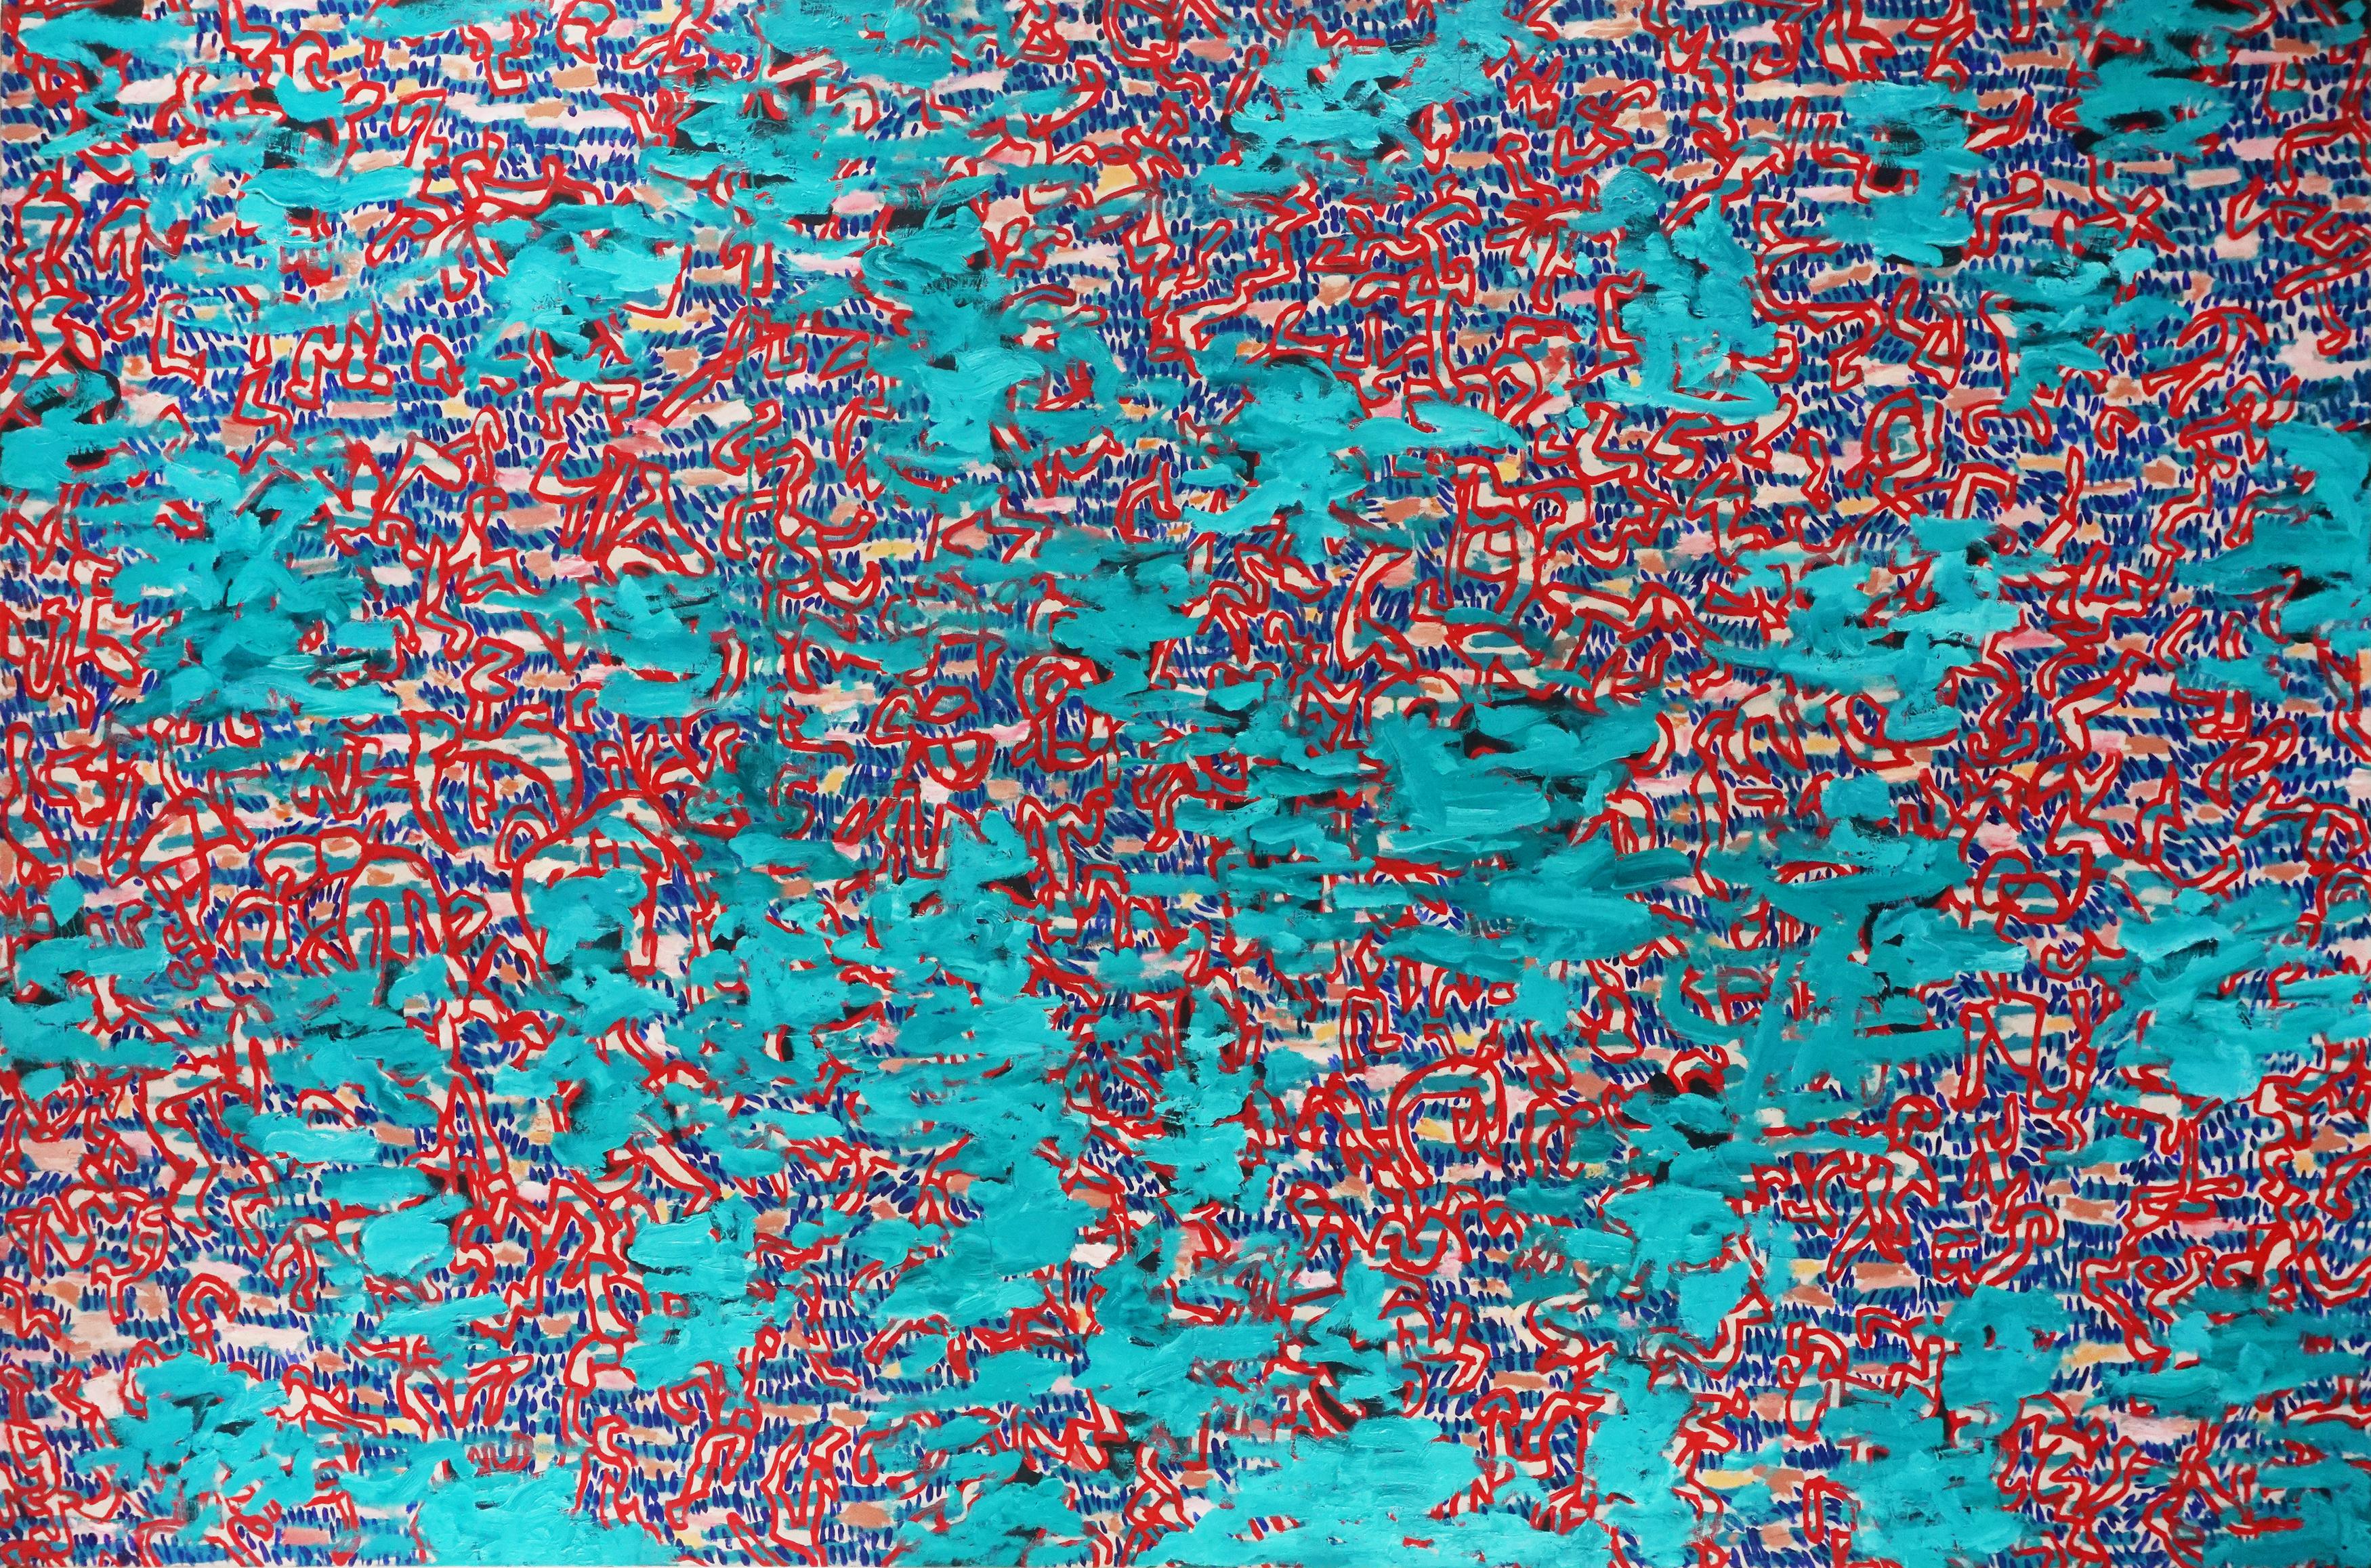 Michael Pauker  Abstract Painting - Large Scale Contemporary Aqua Culture